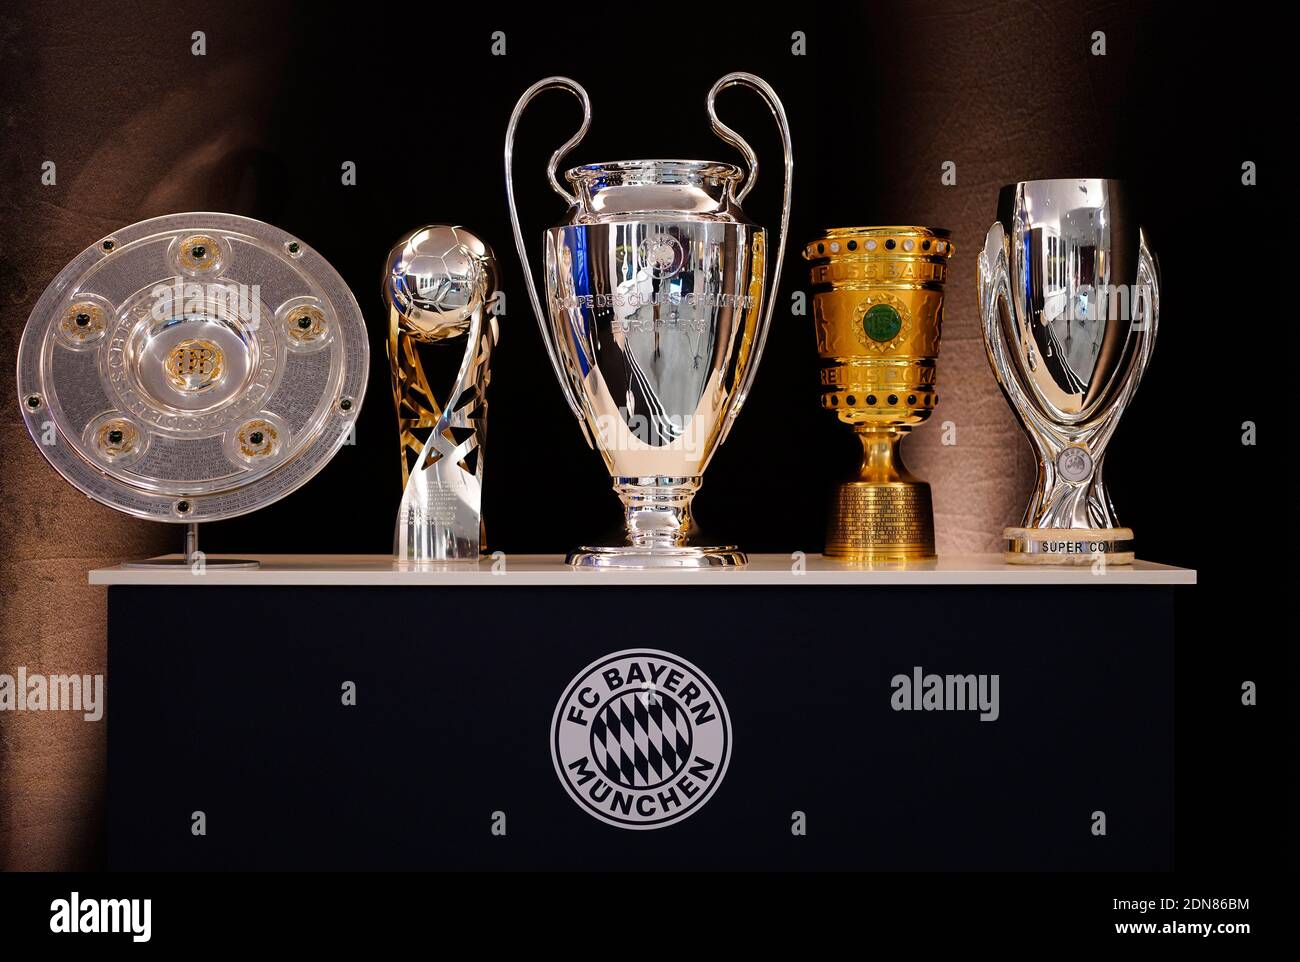 City Of Munich, Deutschland. 17th Dec, 2020. firo: 17.12.2020 football, Bundesliga 1, season 2020/2021, FIFA Men's Player 2020 trophy during the FIFA The BEST Awards ceremony, election as World Player of the Year 2020, trophies and trophies for the 2019/2020 season, FC Bayern-Picture shows the FC Bayern Munich trophies the club won in the 2019/2020 season placed on the stage for the live stream Credit: Pool/Marco Donato-FC Bayern/Pool via Getty Images/via firo Sportphoto | usage worldwide/dpa/Alamy Live News Stock Photo